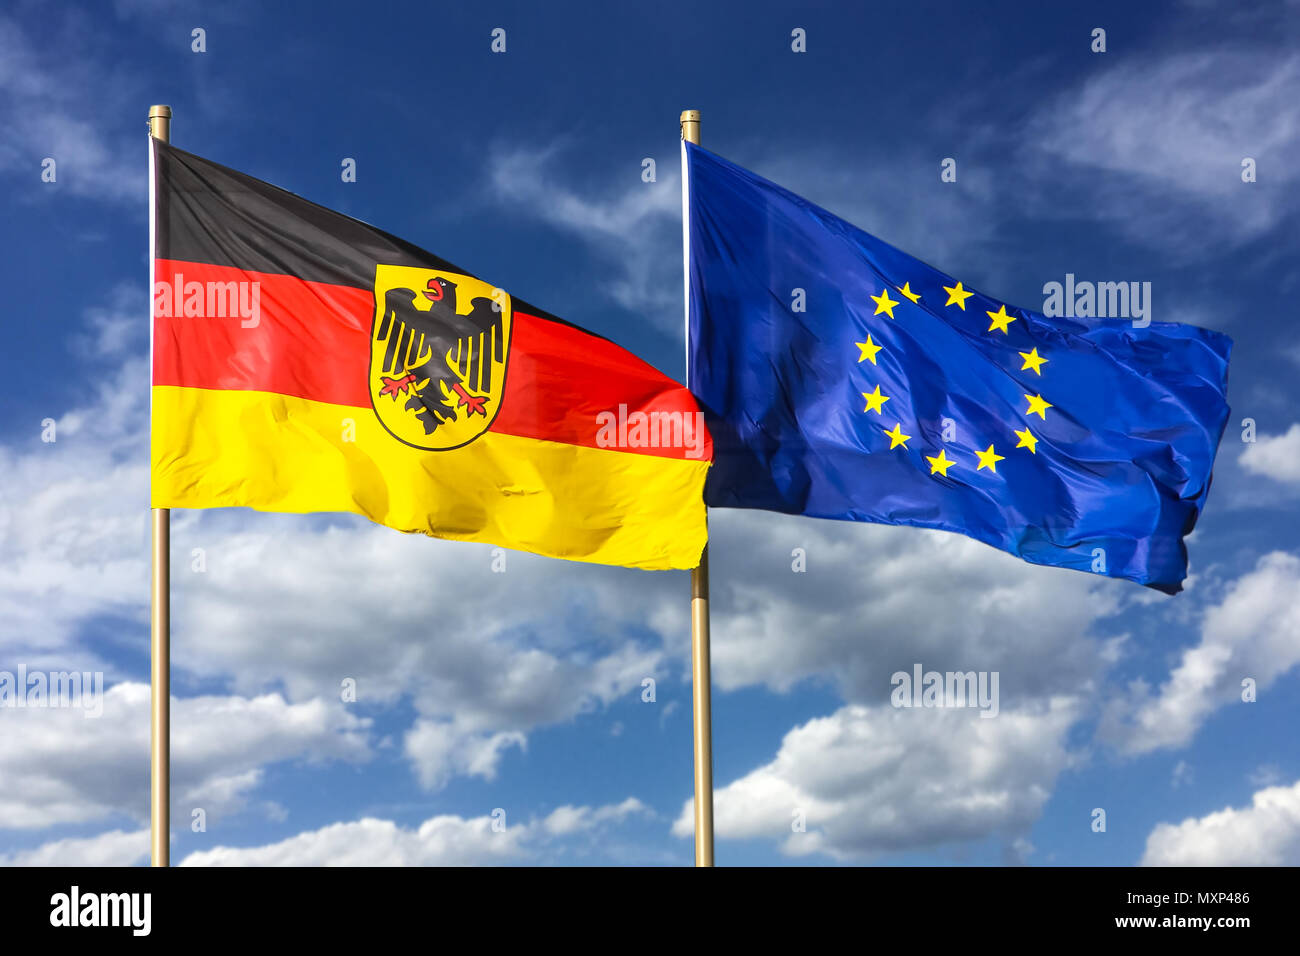 Flags of Germany (Federal Republic of Germany; in German: Bundesrepublik Deutschland) and the European Union (EU) waving in the wind on a bright sunny Stock Photo